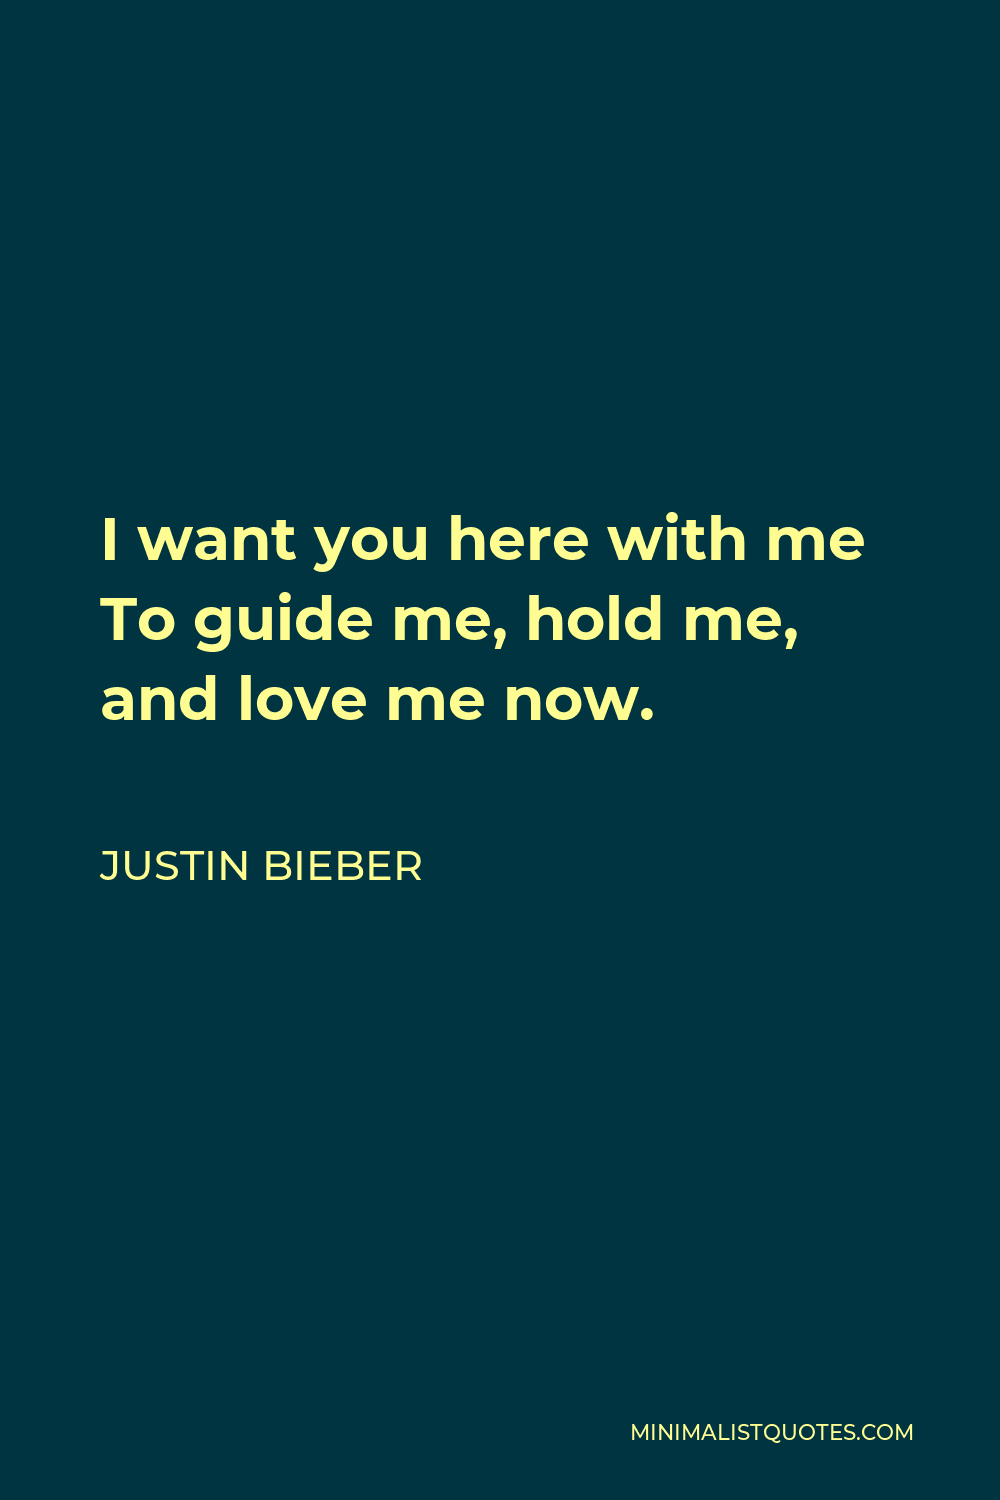 Justin Bieber Quote - I want you here with me To guide me, hold me, and love me now.